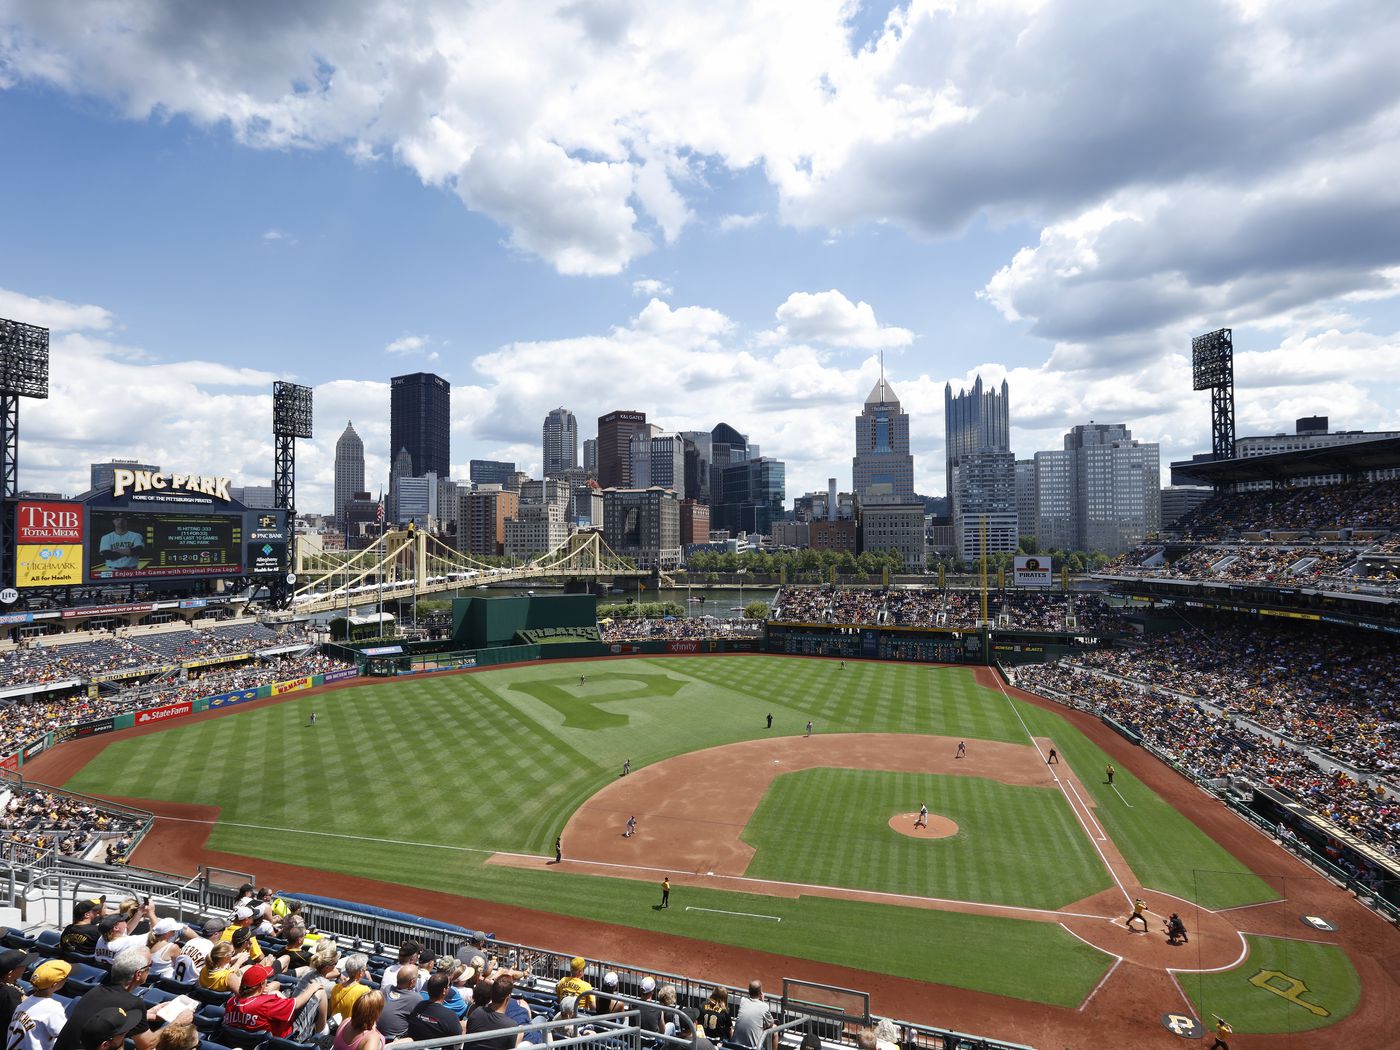 The Draw of PNC Park